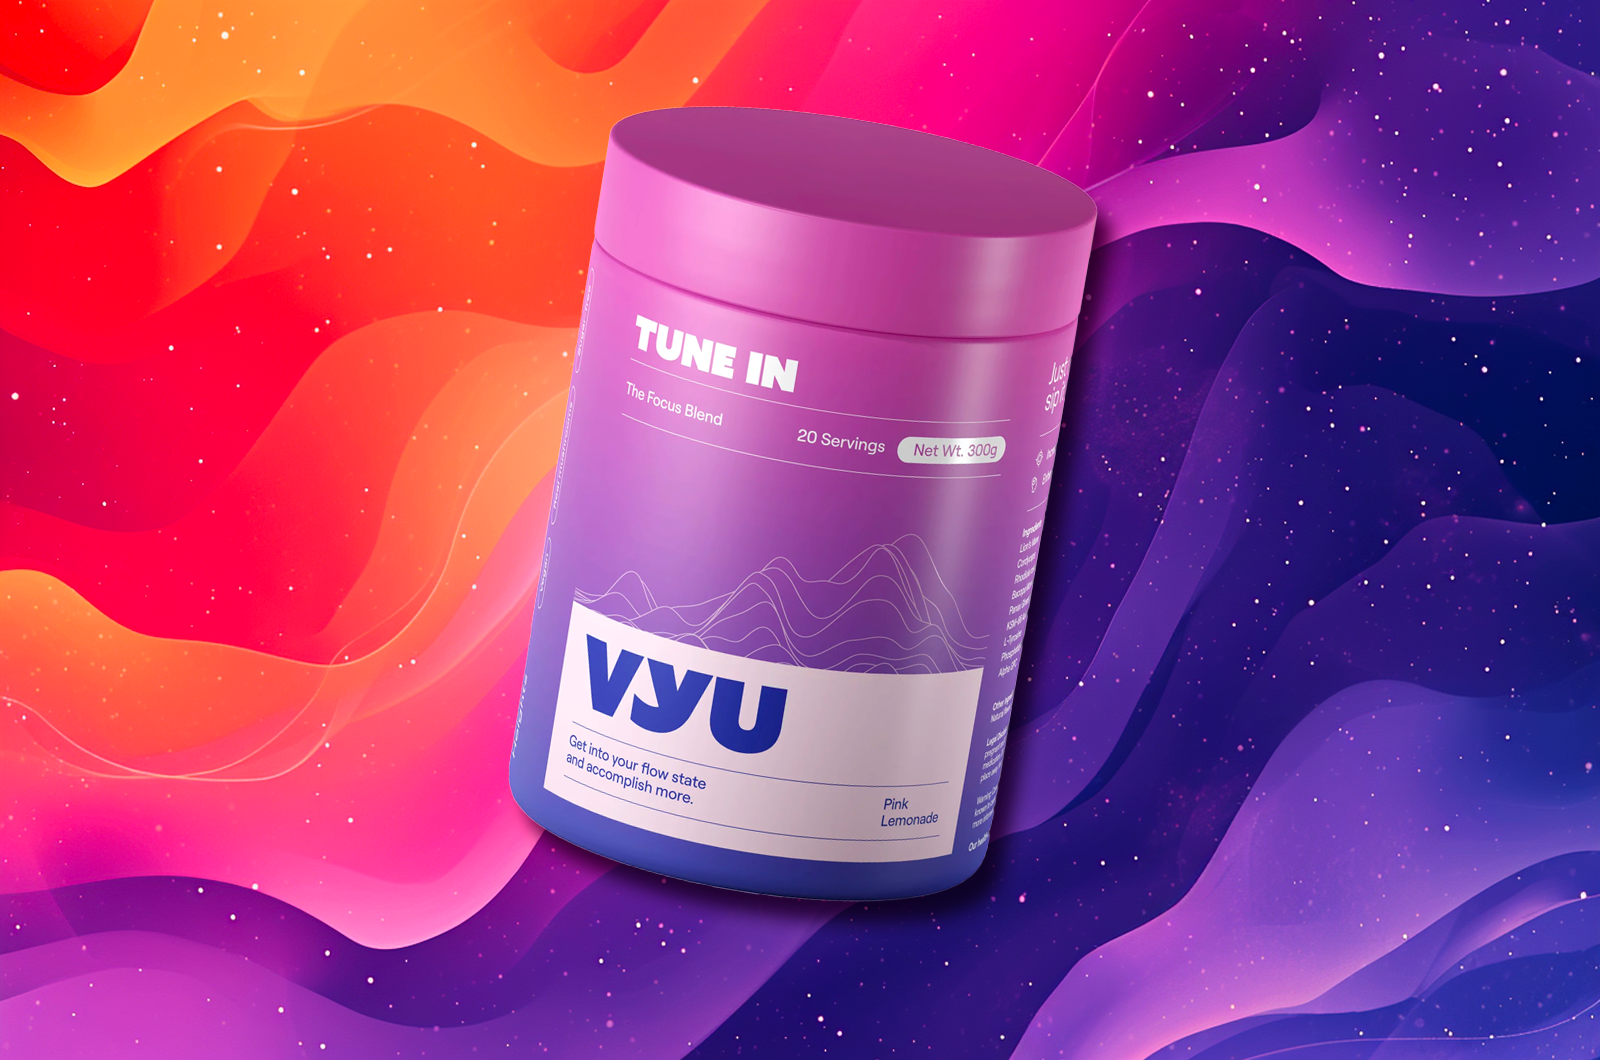 A container of VYU TUNE IN with Pink Lemonade flavor placed against a multicolored background